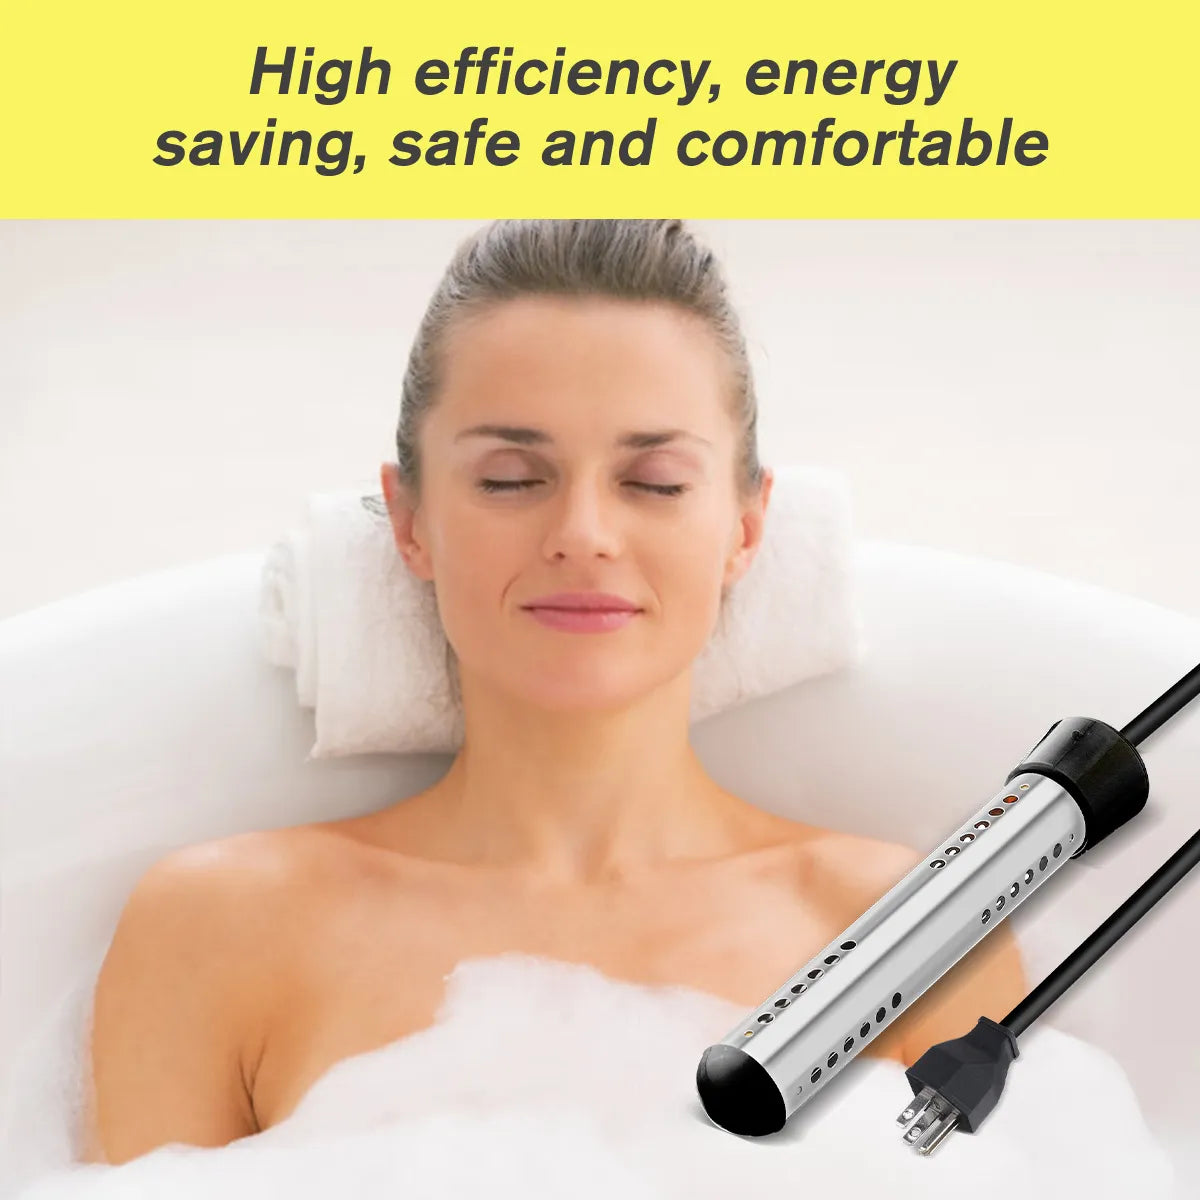 Portable Pool Water Heater 1500W 120V Immersion Tubular Electric Heater with Digital Thermometer for Inflatable Pool Bathtub